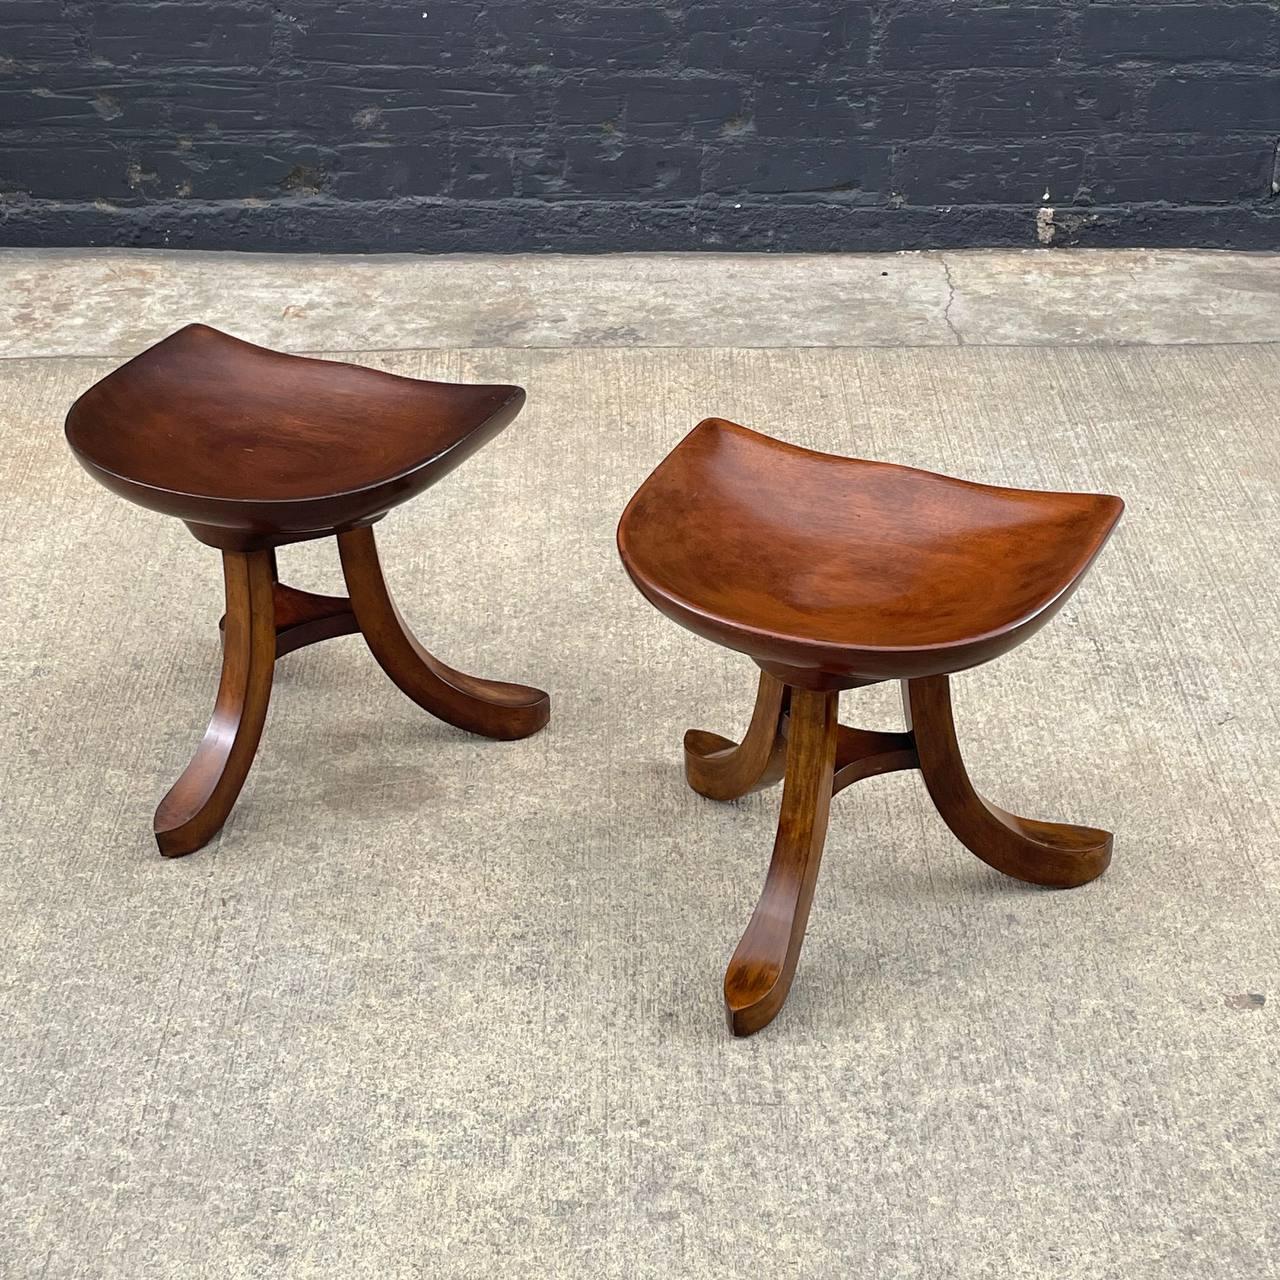 Mid-20th Century Pair of Vintage Sculpted Mahogany Tripod Stools by Smith & Watson For Sale